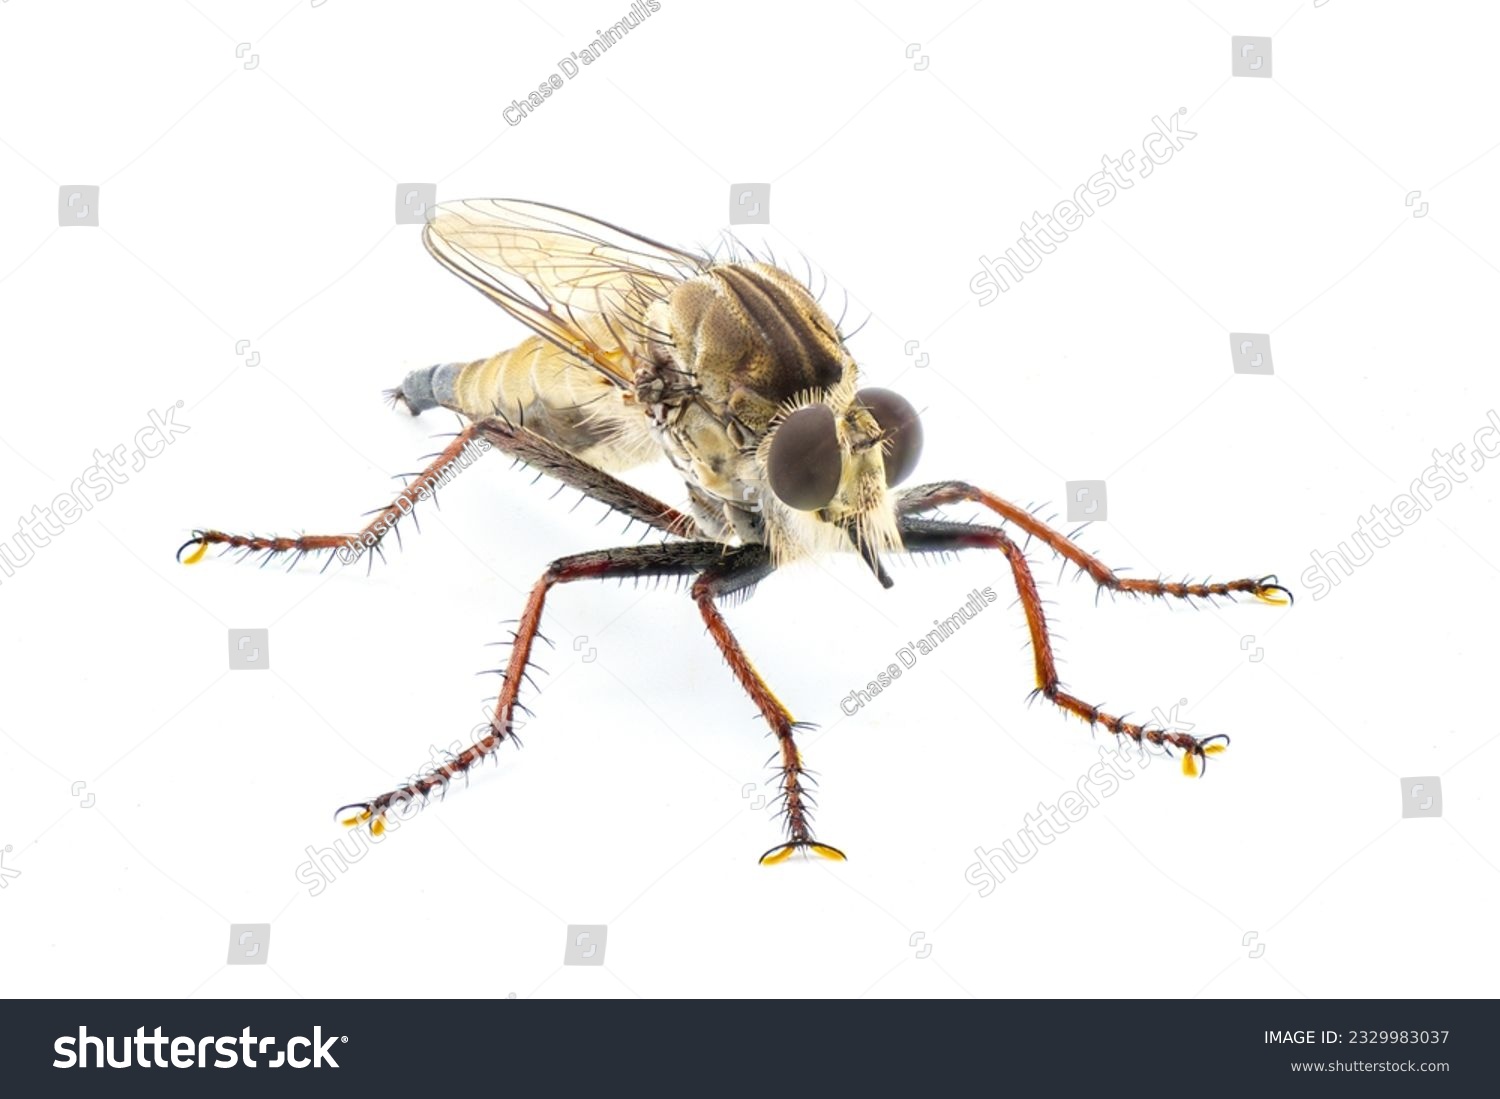 Robber fly Isolated on white background.  Proctacanthus longus a species in Florida.  Extremely detailed macro closeup showing hairs and bristles on legs and face. front side profile view #2329983037